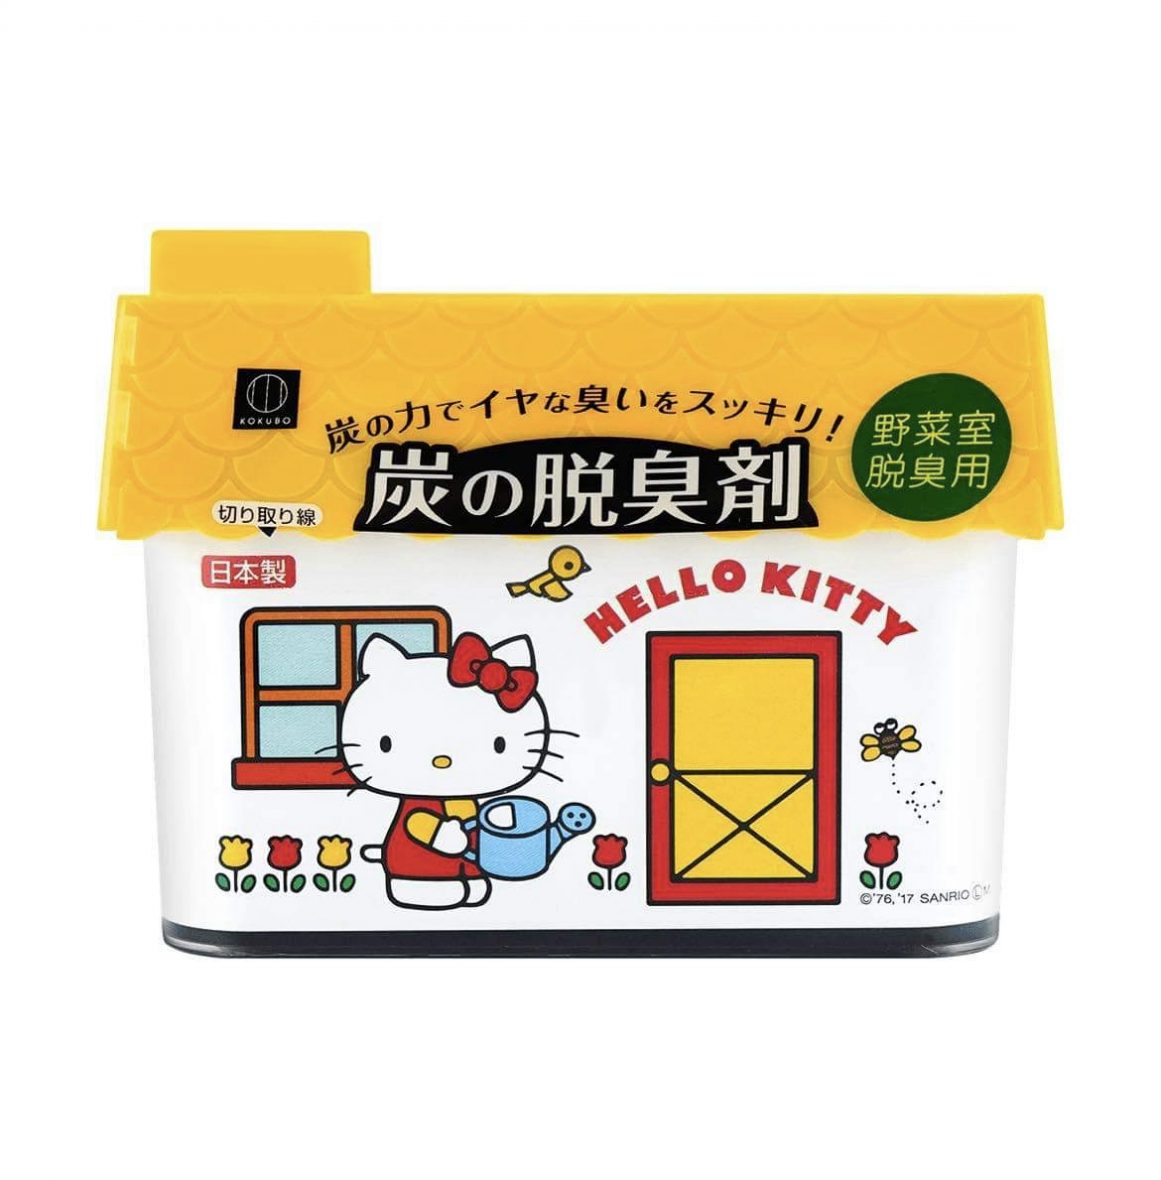 Hello Kitty Charcoal Deodorizer For Refrigerator